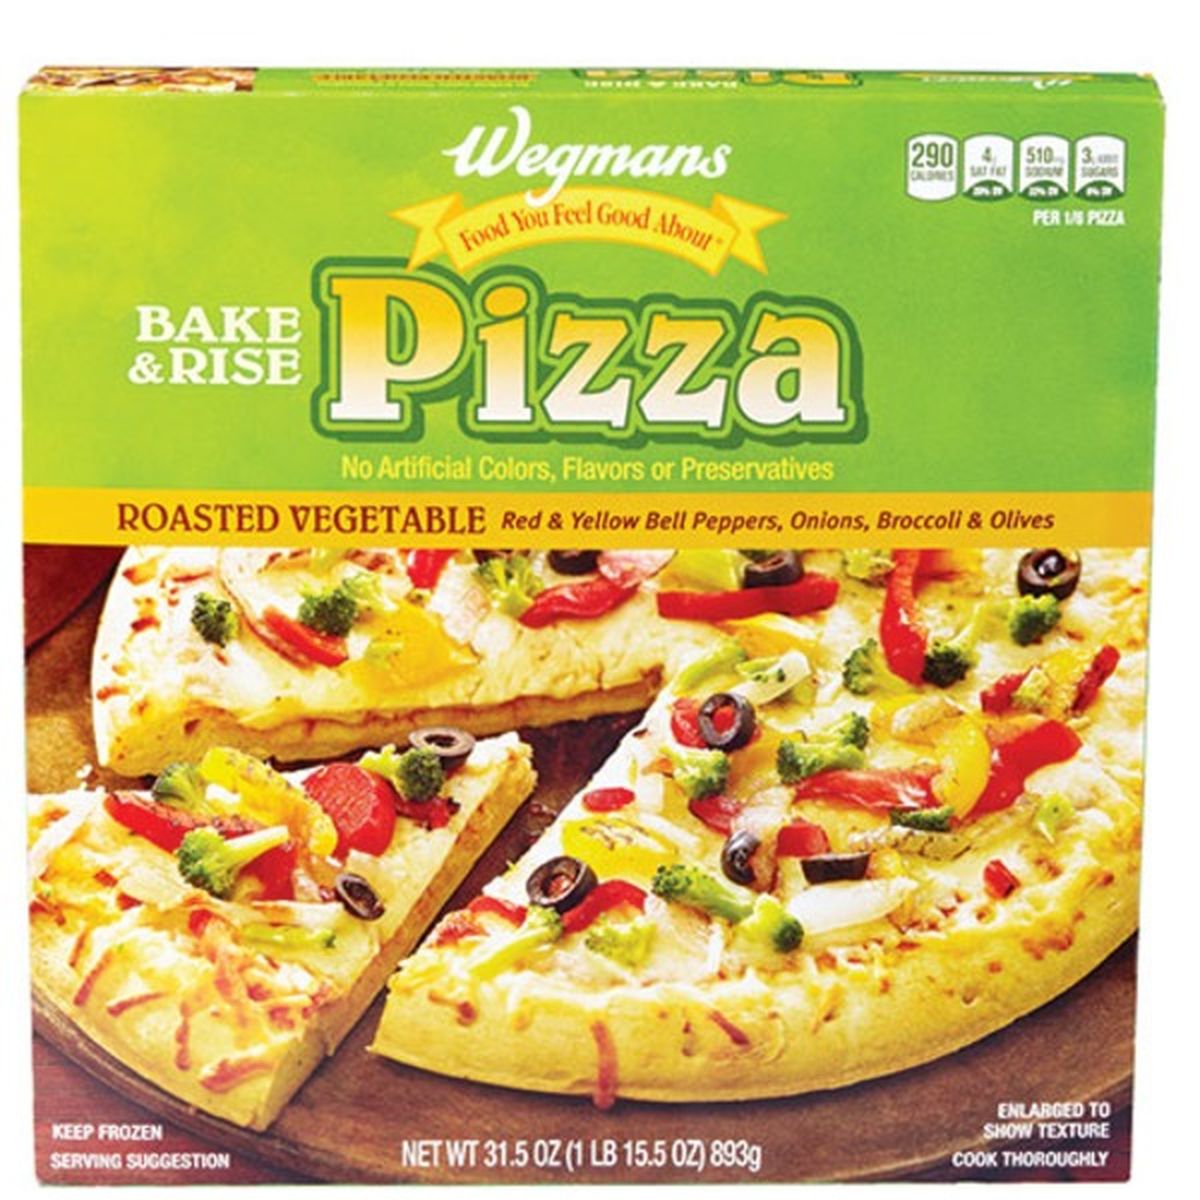 Calories in Wegmans Roasted Vegetable Bake & Rise Pizza